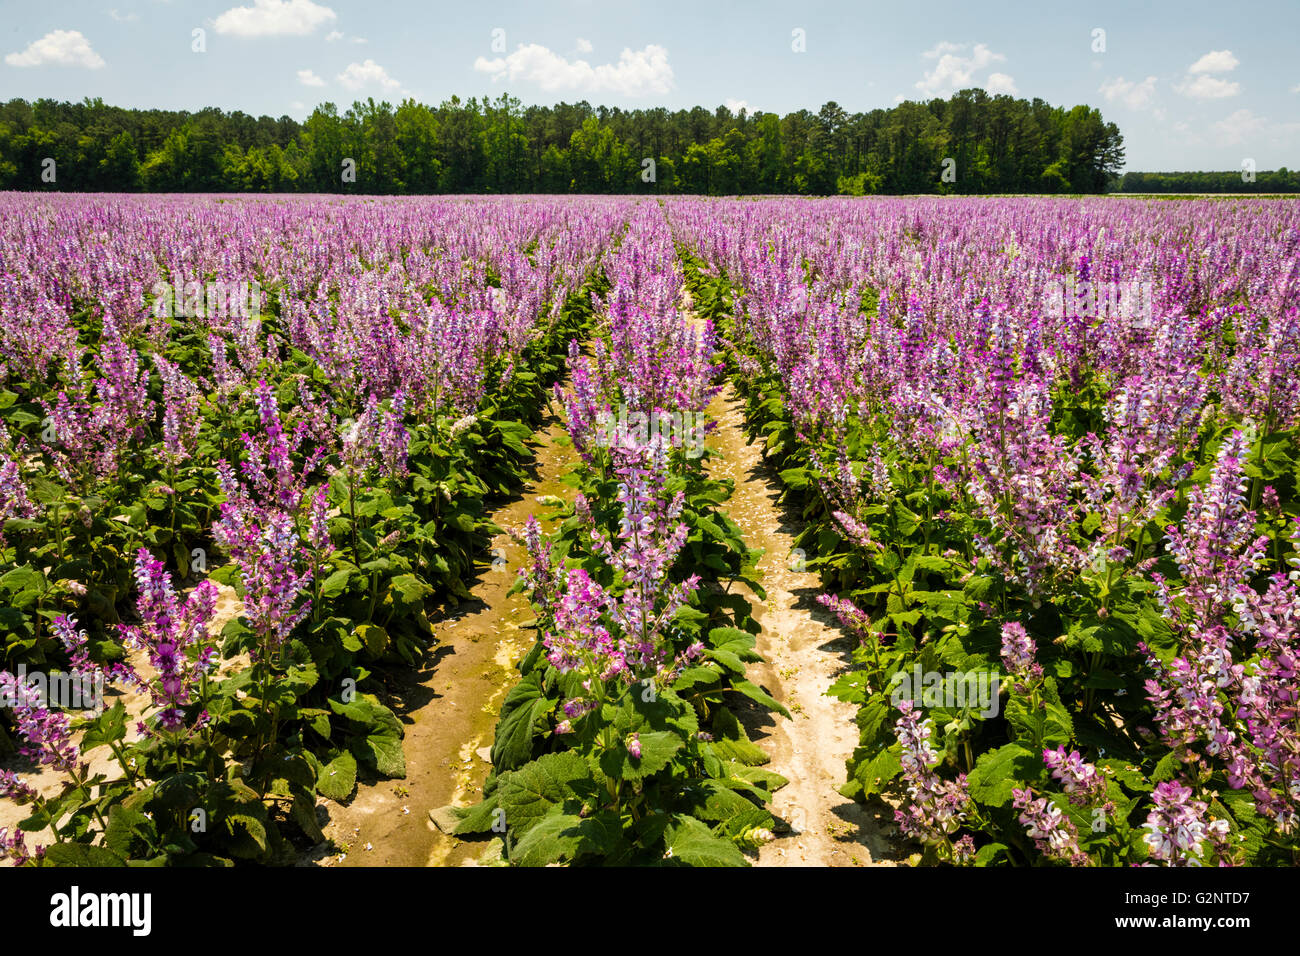 Field of lavender-colored Clary Sage (Salvia sclarea) in Robersonville, Martin County, NC USA Stock Photo